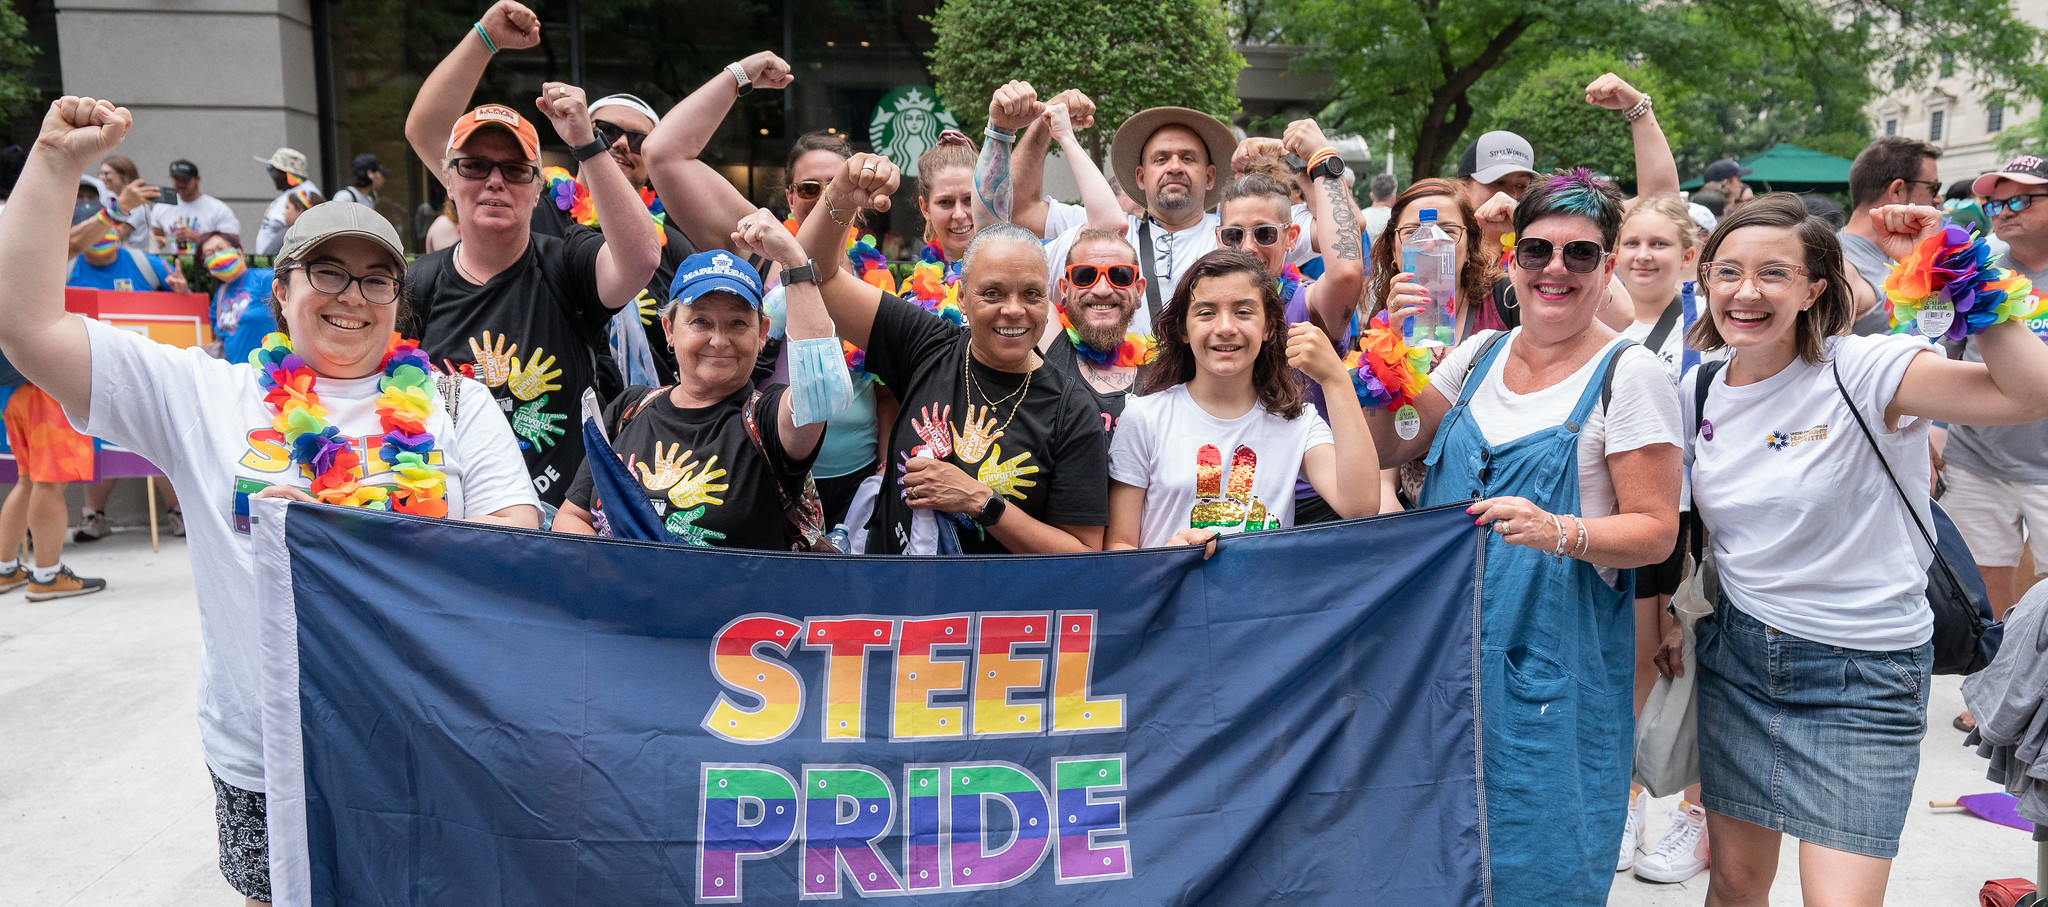 A group of people standing outdoors, with their fists up. There is a flag they are holding up that says "Steel Pride"